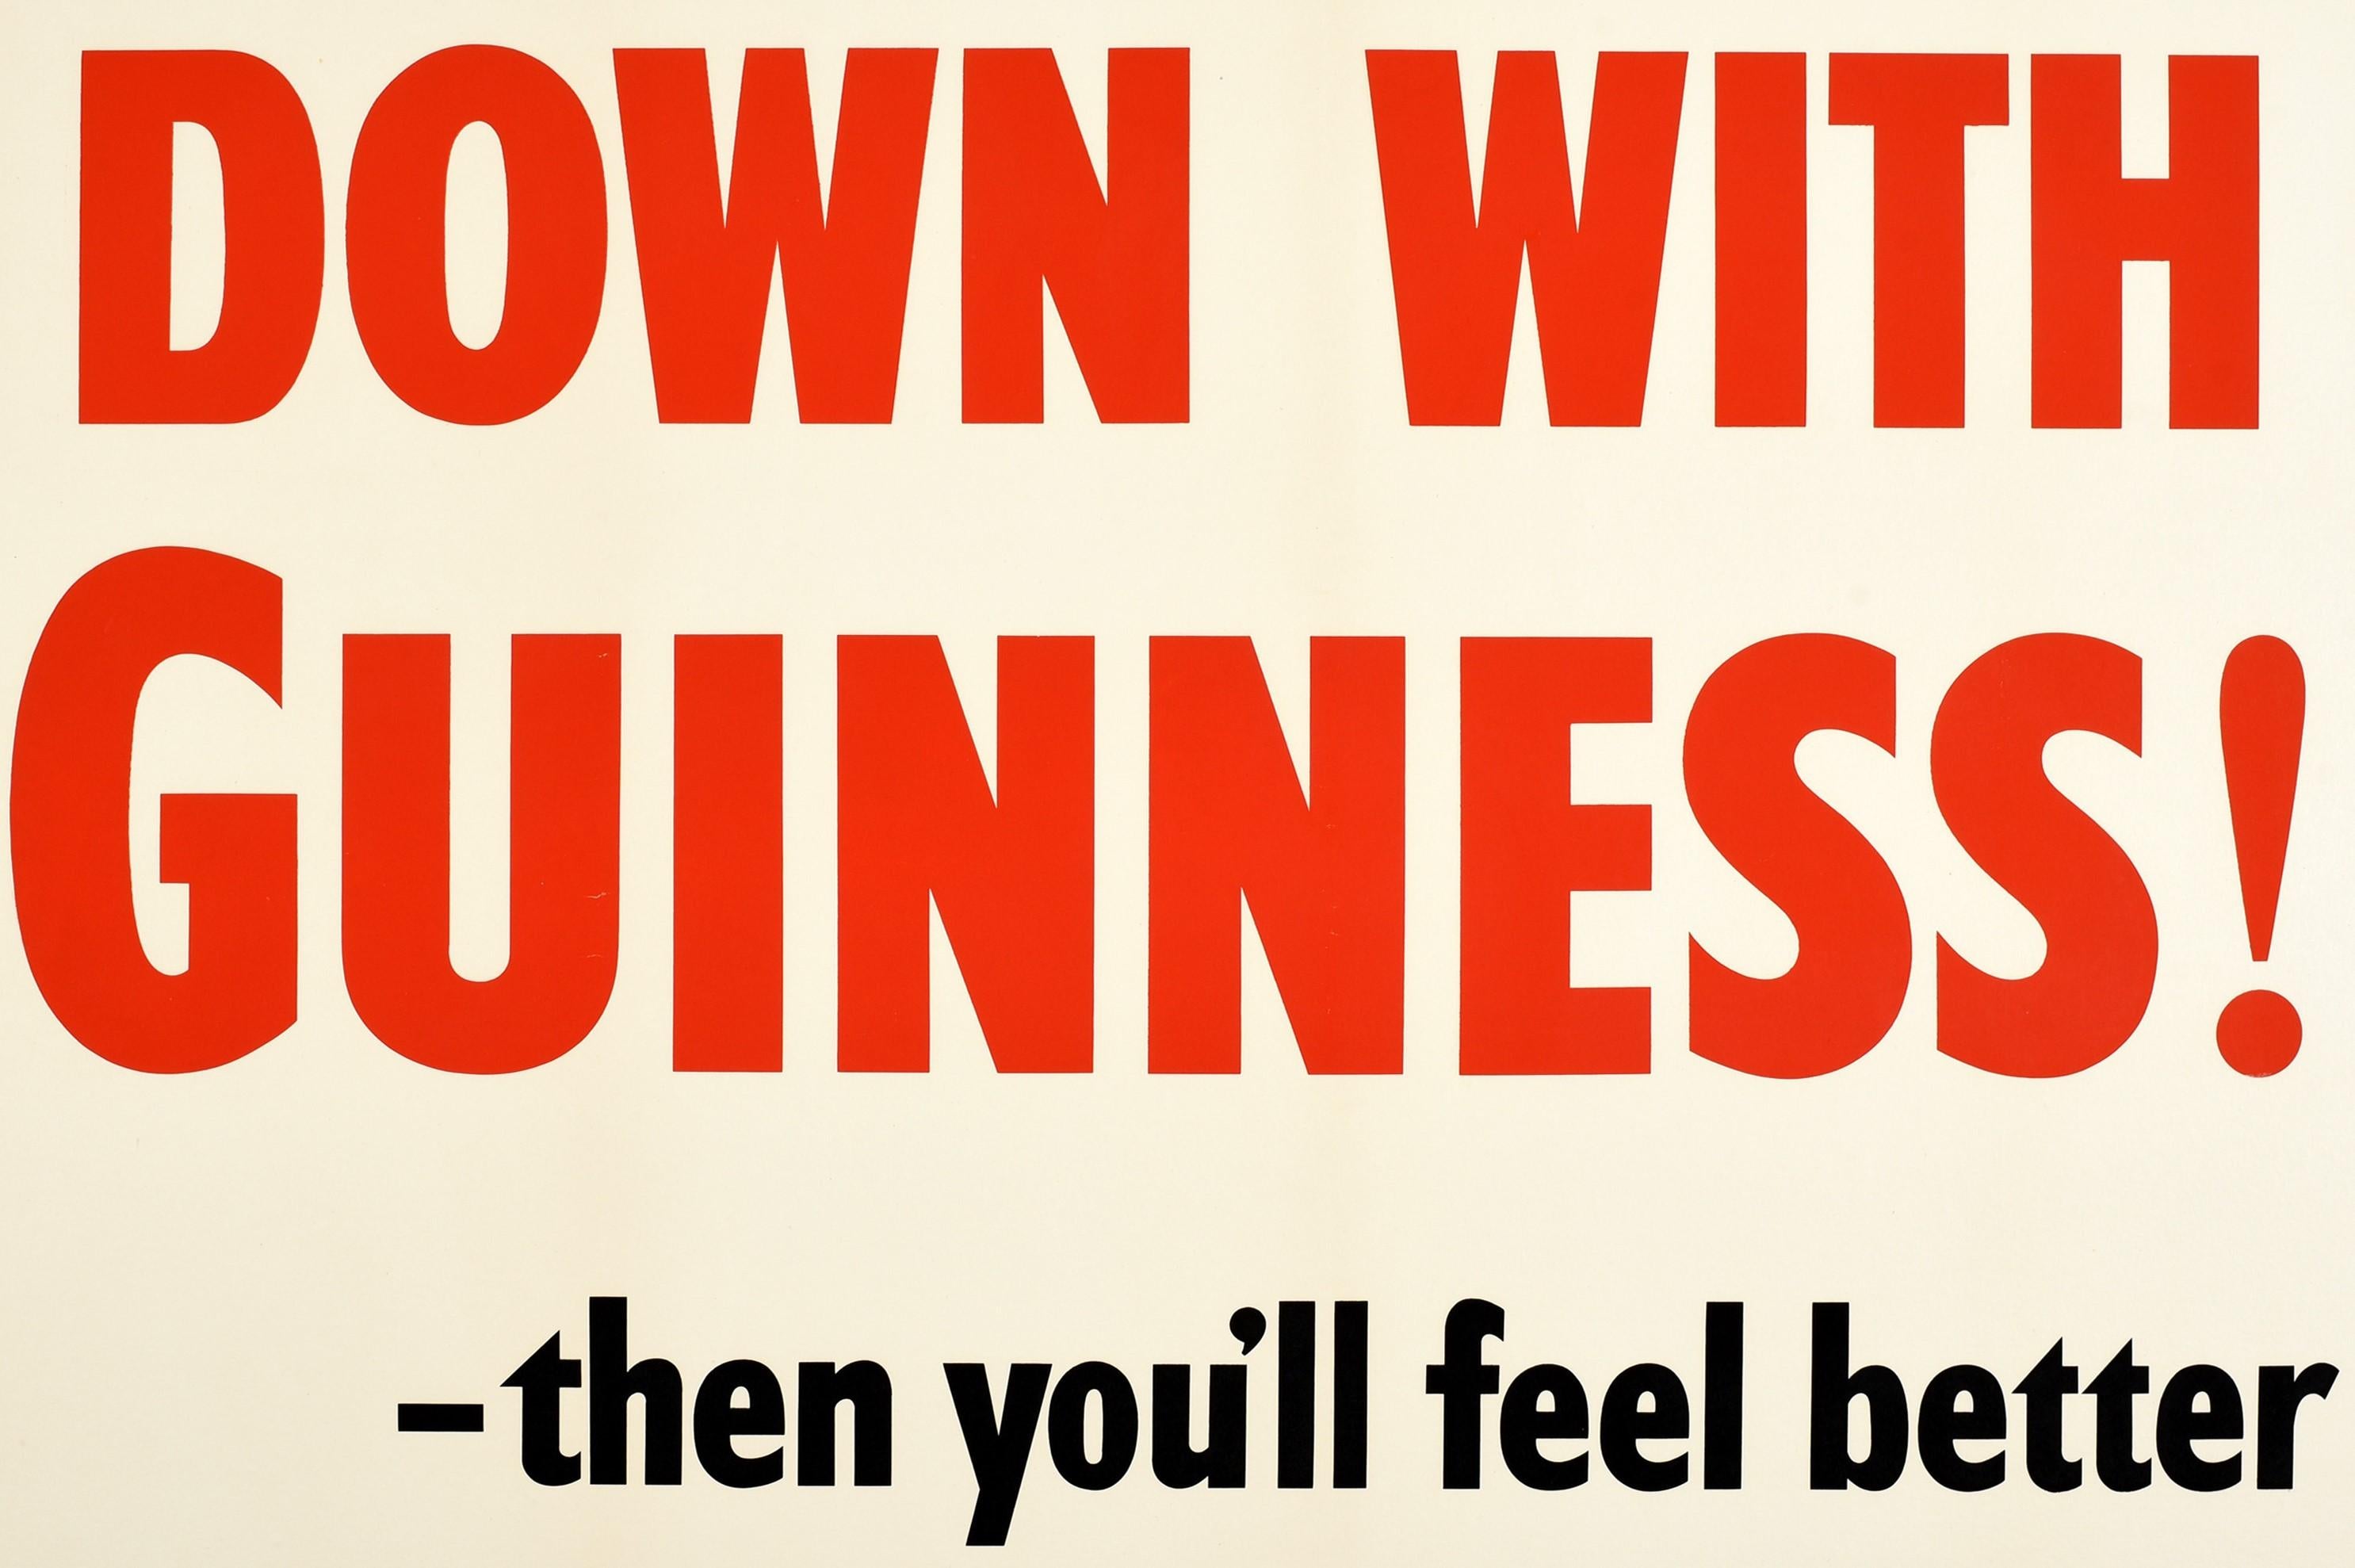 Original vintage drink advertising poster featuring text in bold red and black letters framed by a green line border: Down With Guinness! - then you'll feel better. One of the world's most popular beer drink brands, Guinness is an Irish dry stout